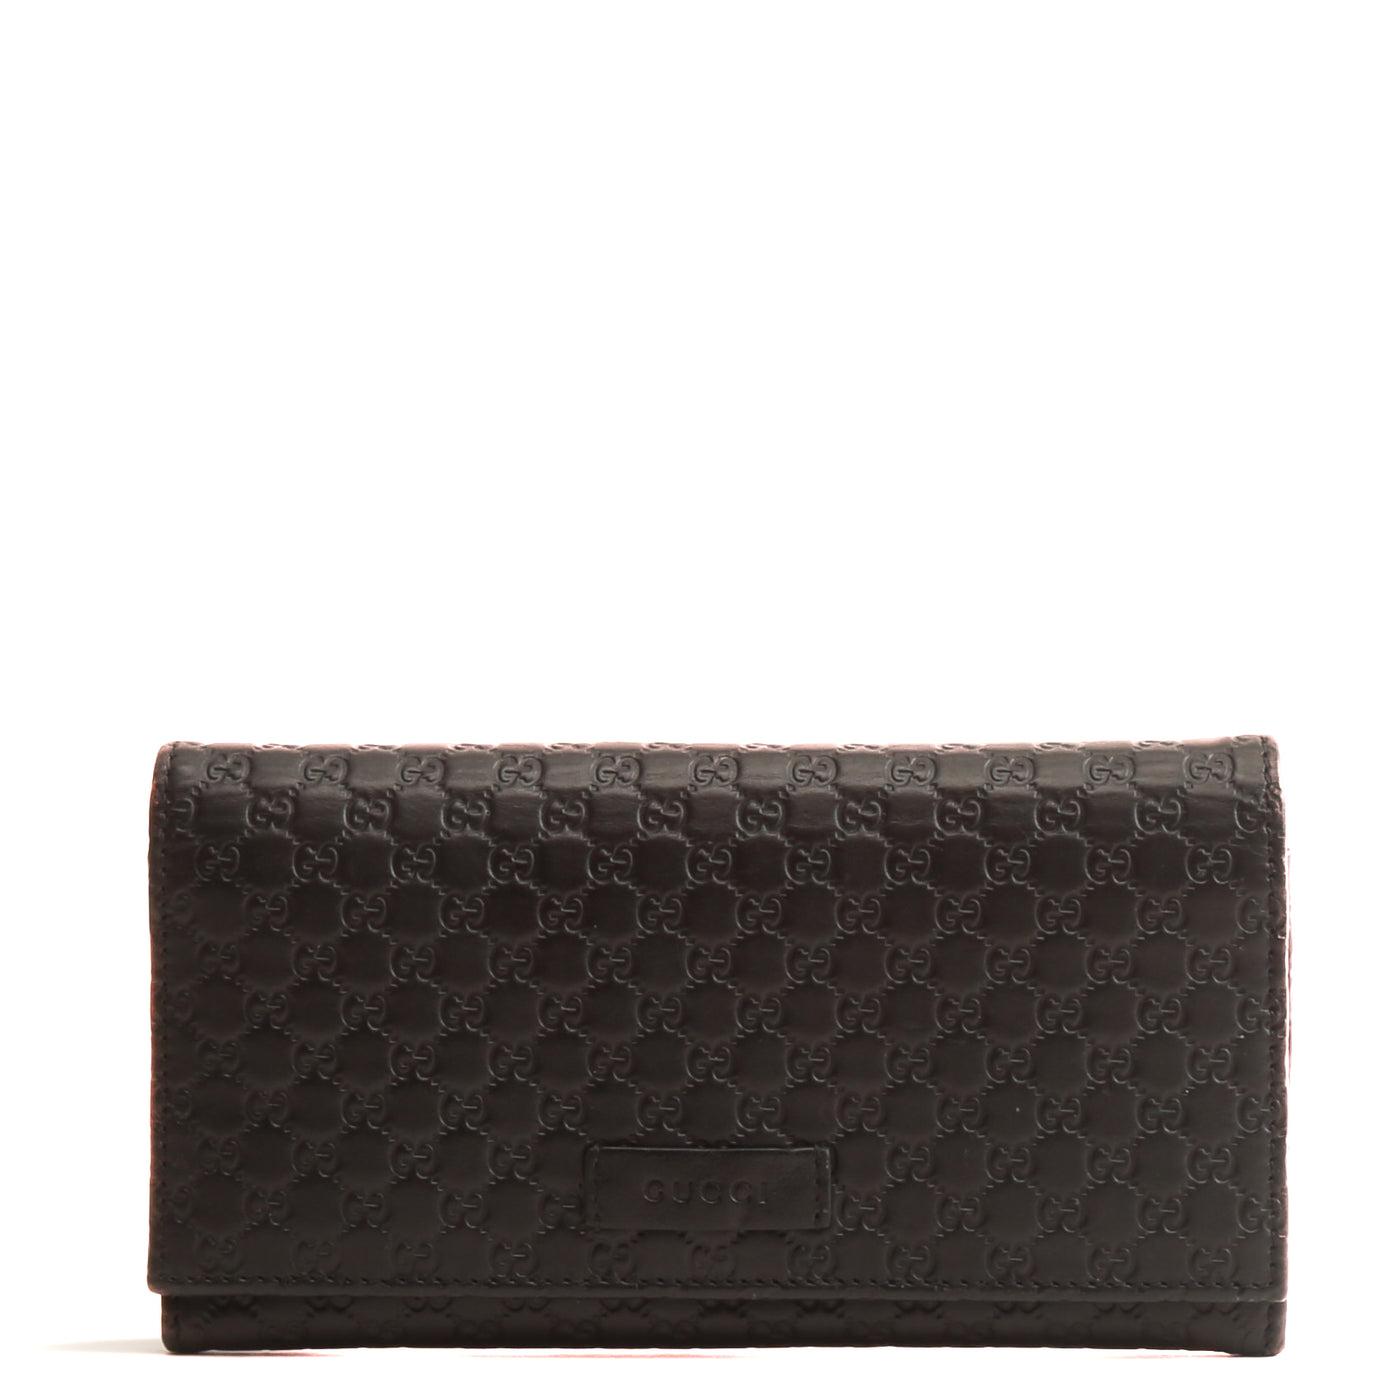 GUCCI Micro Guccissima Continental Wallet - Black - OUTLET FINAL SALE